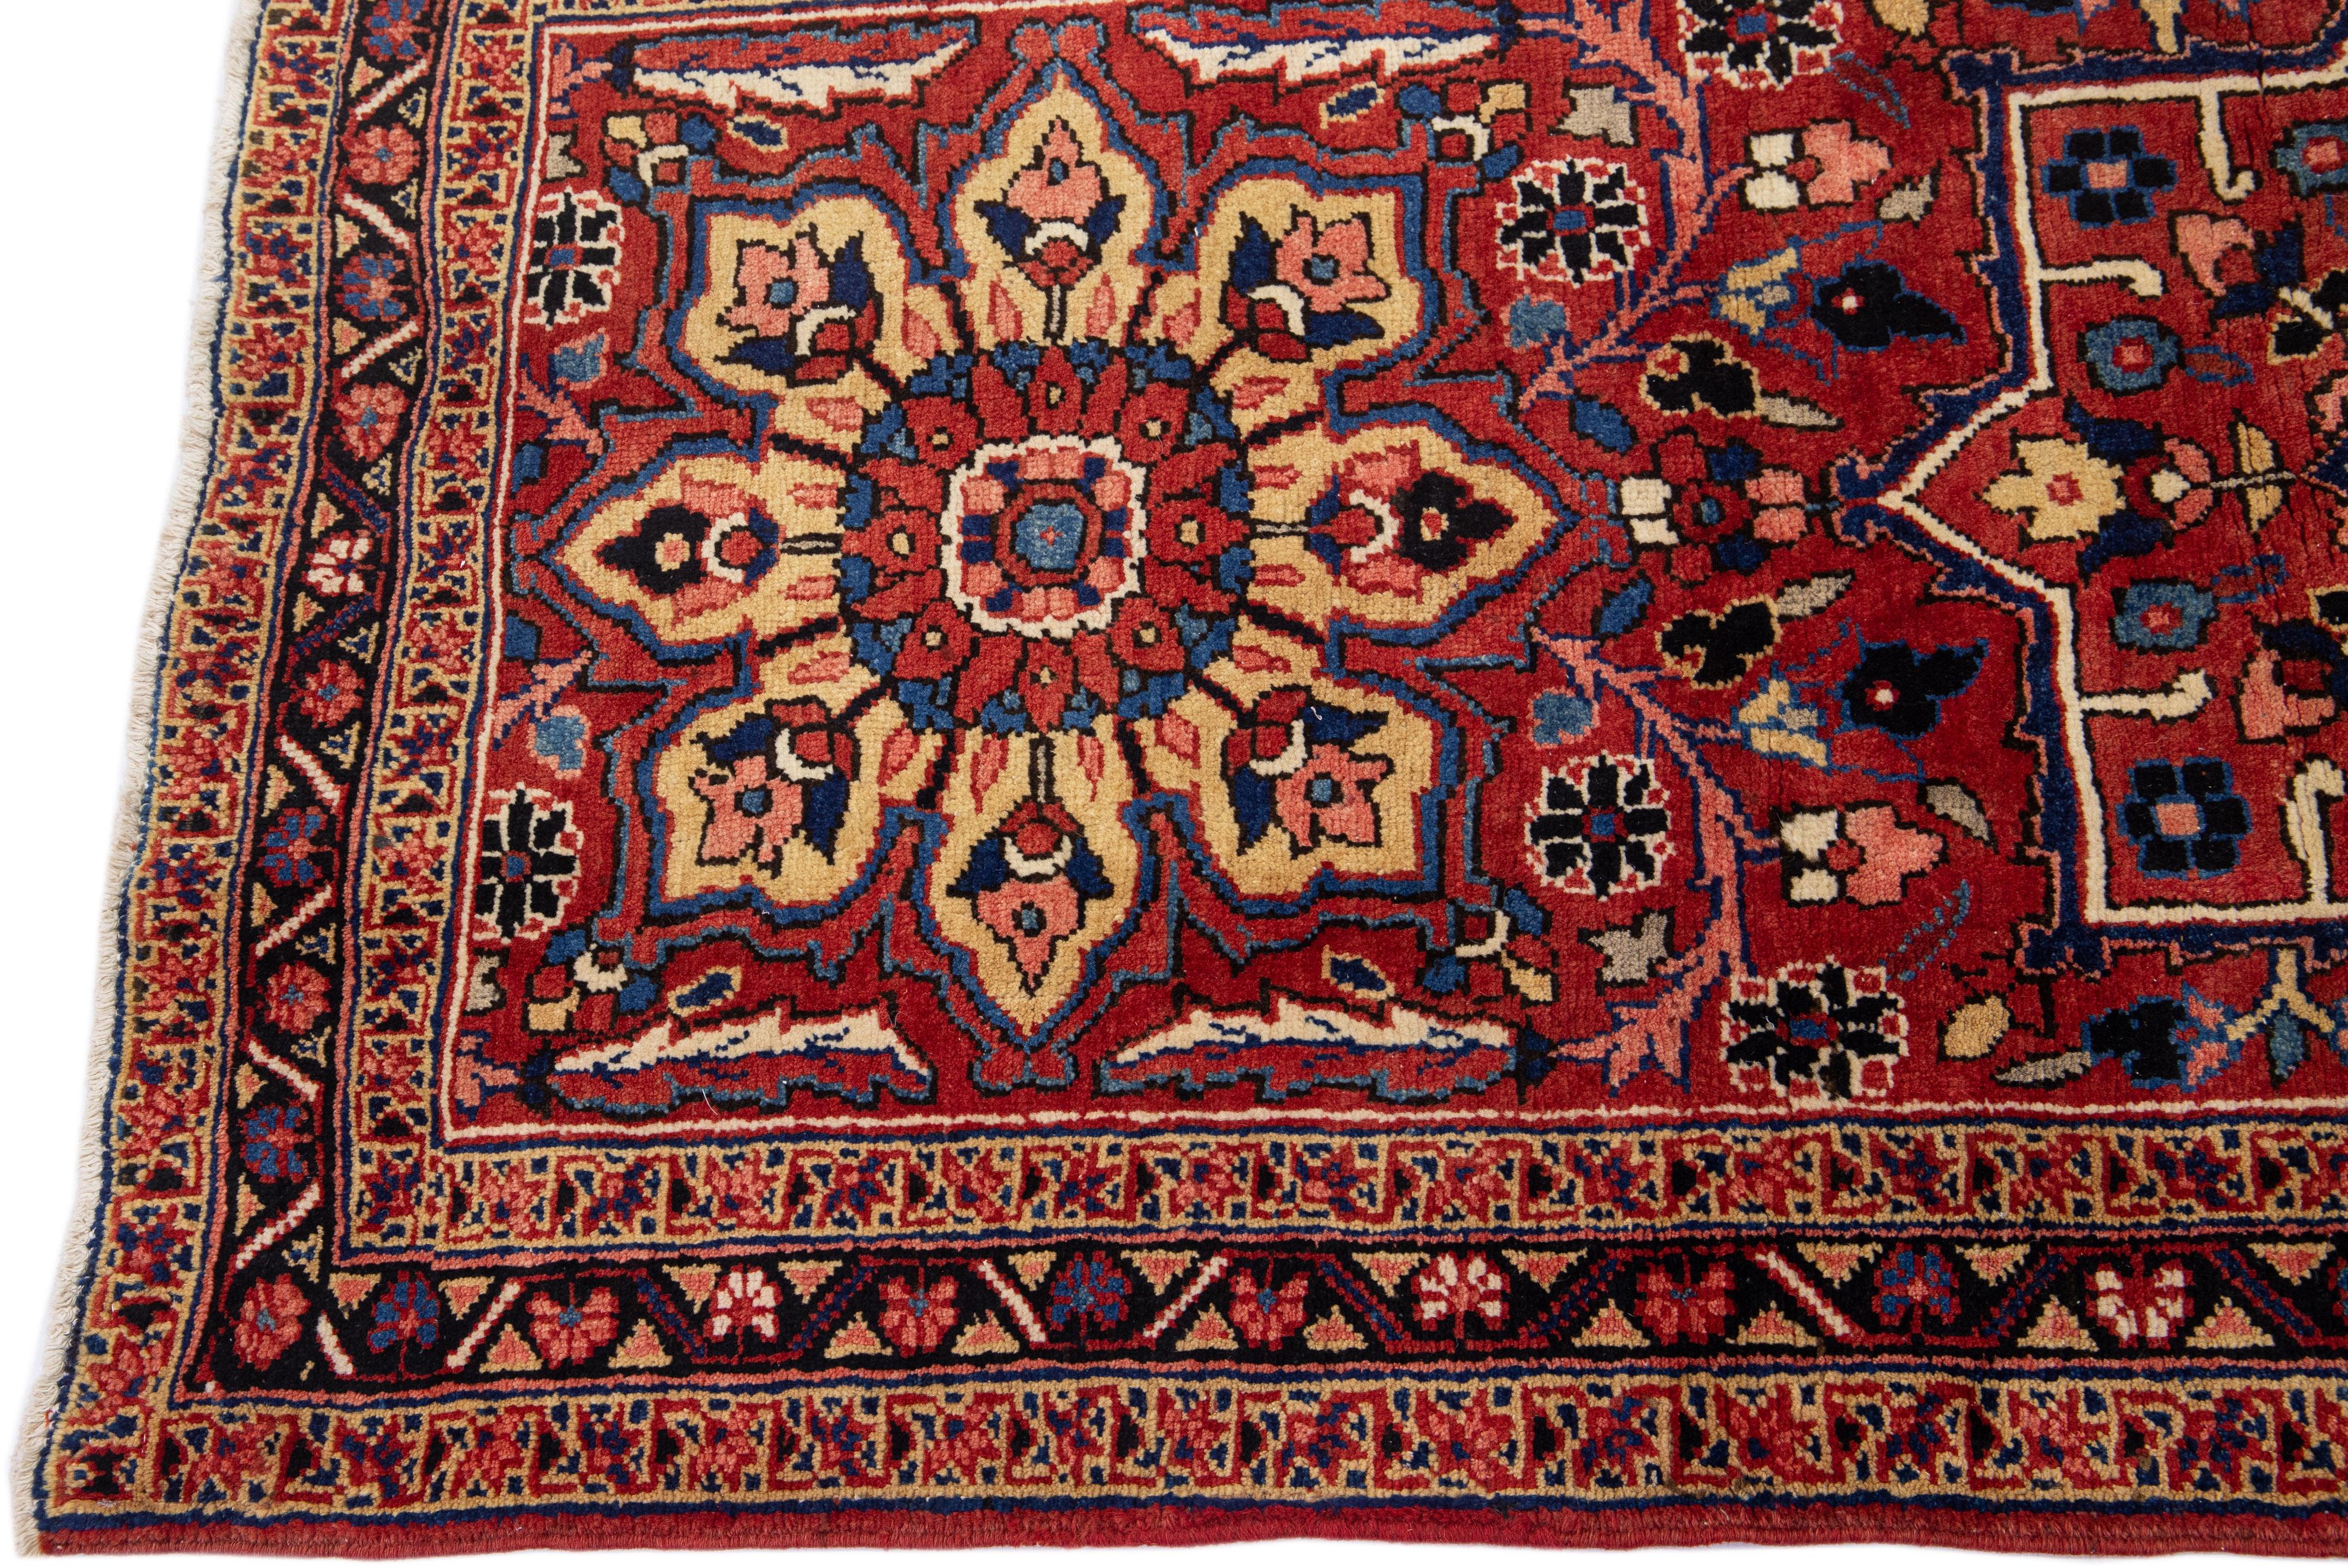 Beautiful antique Heriz hand-knotted wool rug with a red color field. This Persian rug has a designed frame and multicolor accents in a gorgeous Tribal design.

This rug measures: 3'8